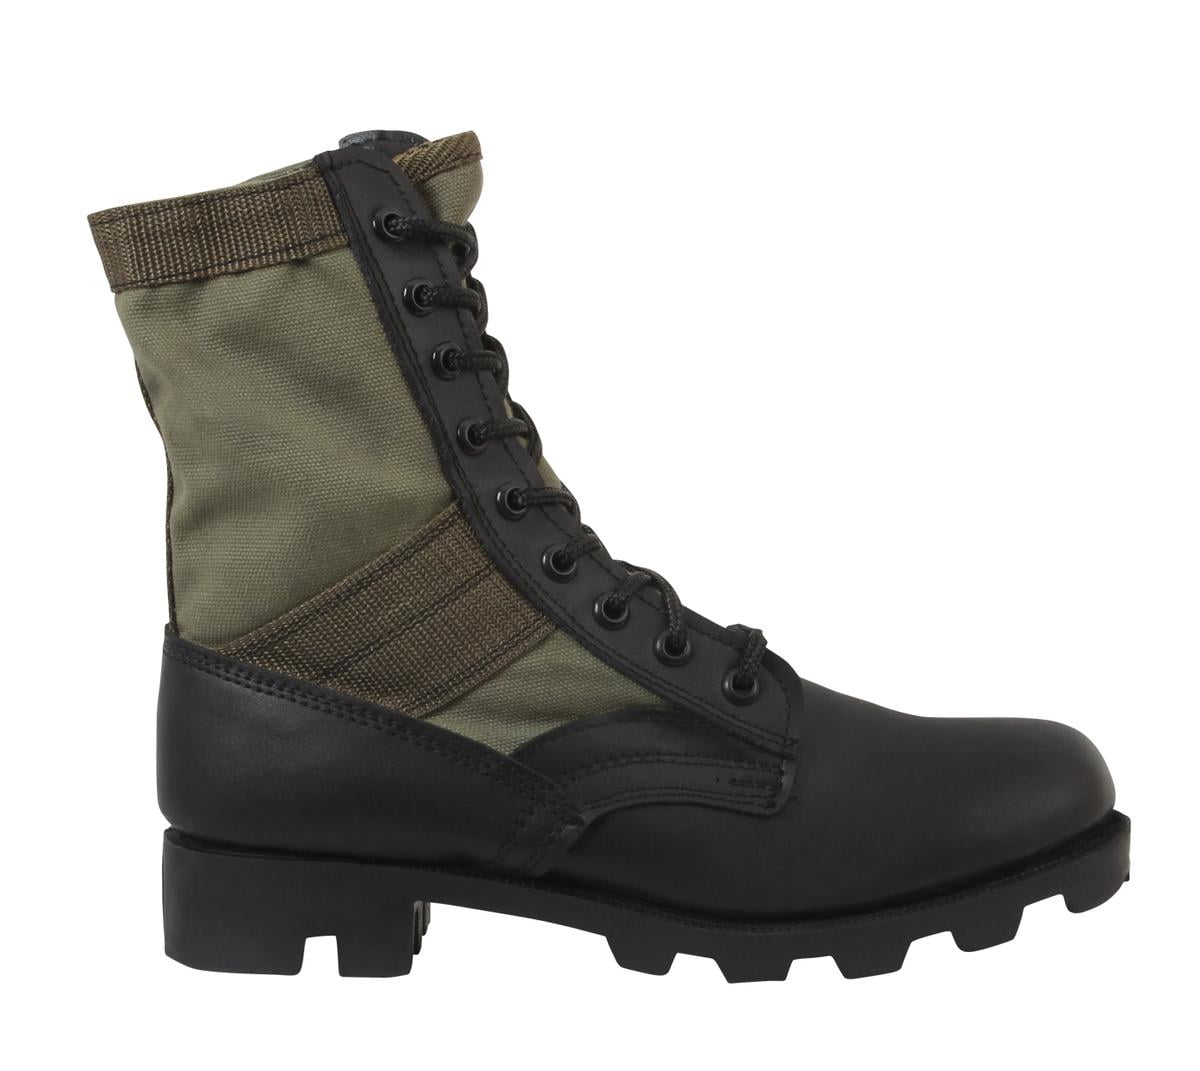 Rothco 5080 Olive Drab G.I. Style Discount Jungle, Combat Boot, New ...